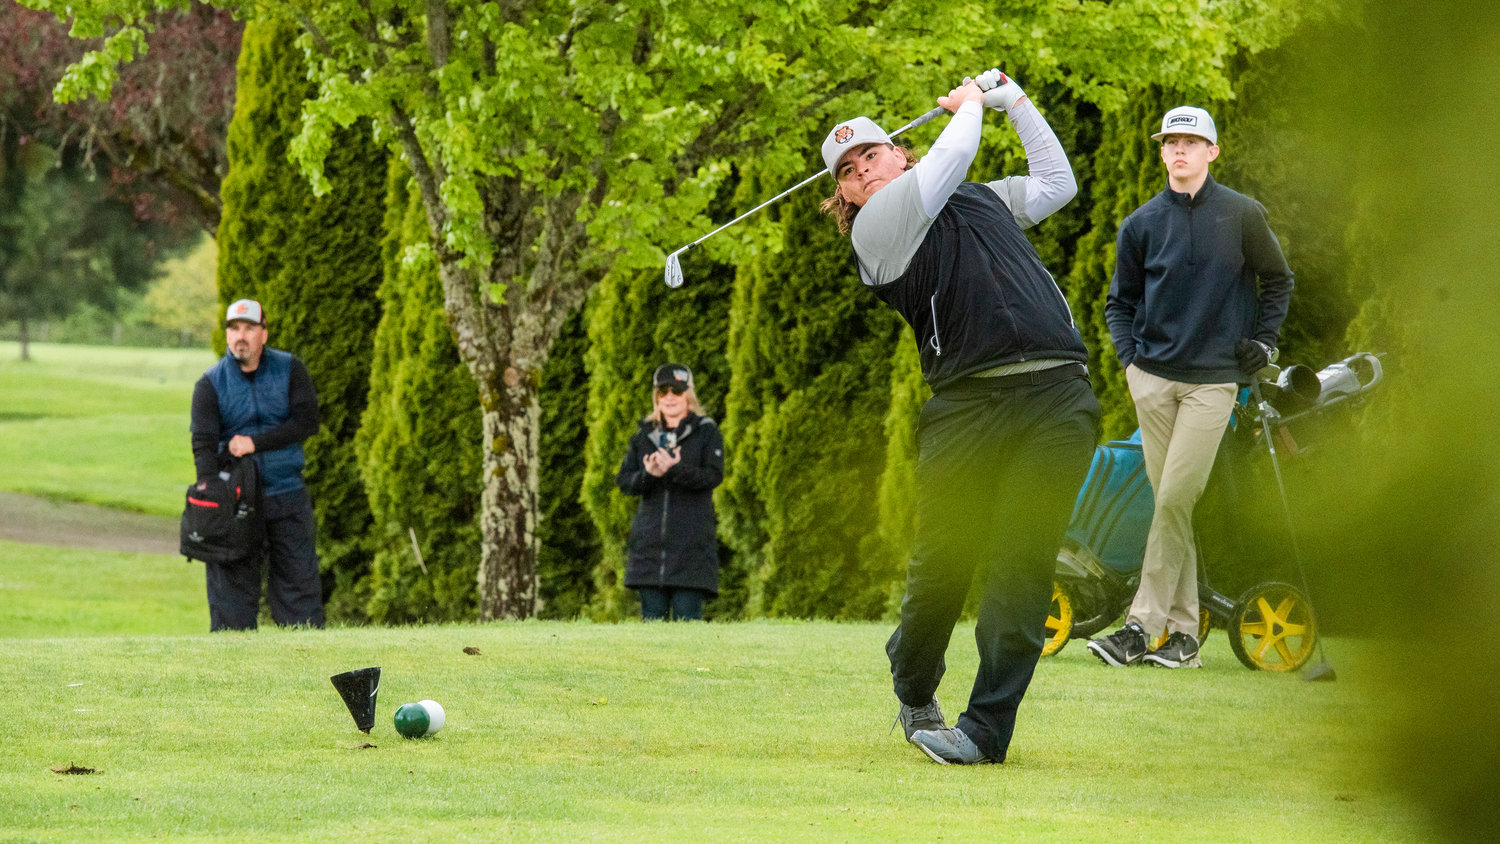 Kalama senior Todd Tabor swings his club at Riverside Golf Course in Chehalis on Wednesday.